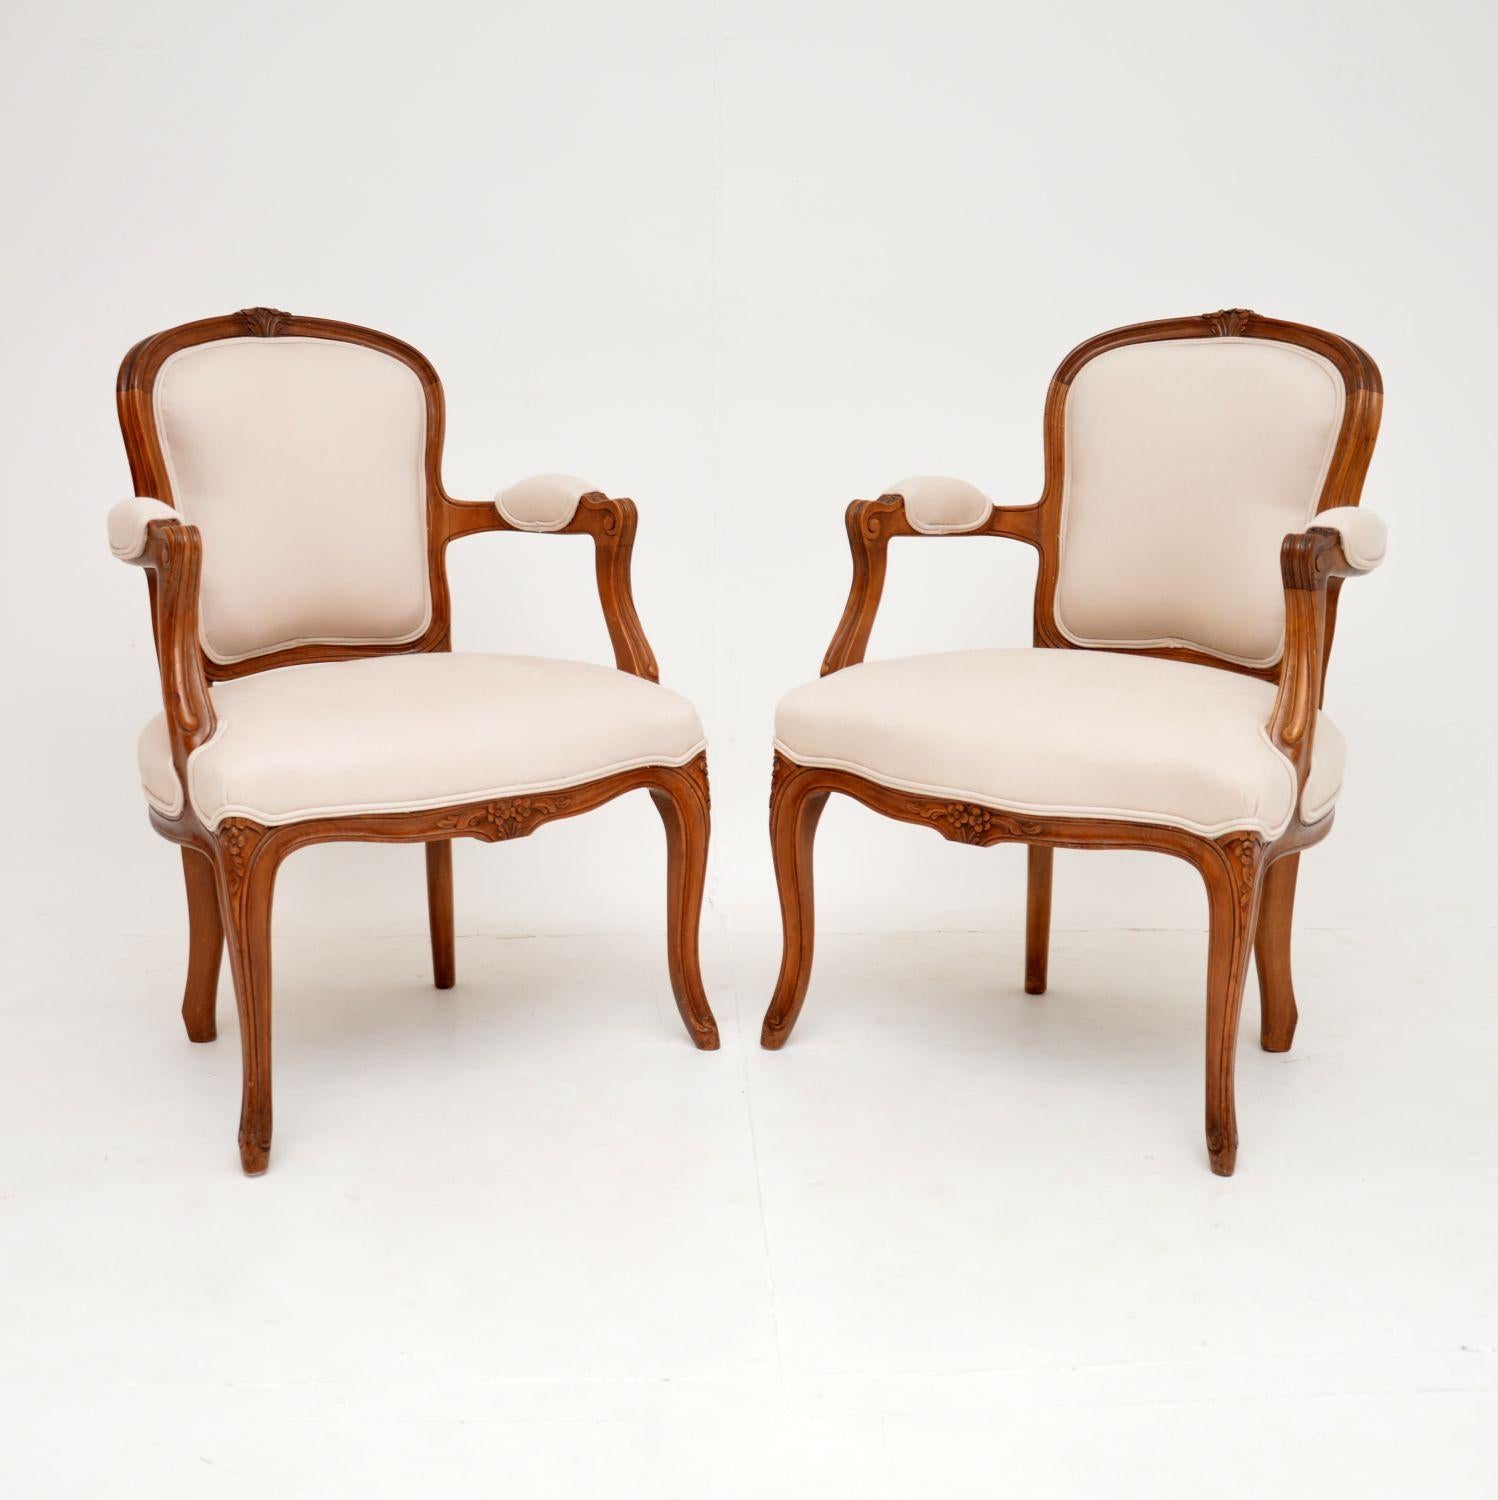 A beautiful pair of antique French salon armchairs in solid walnut. They date from around the 1920-30’s.

The quality is fantastic, the frames are elegant and sturdy, with crisp floral carving. They have lovely proportions and are useful for a